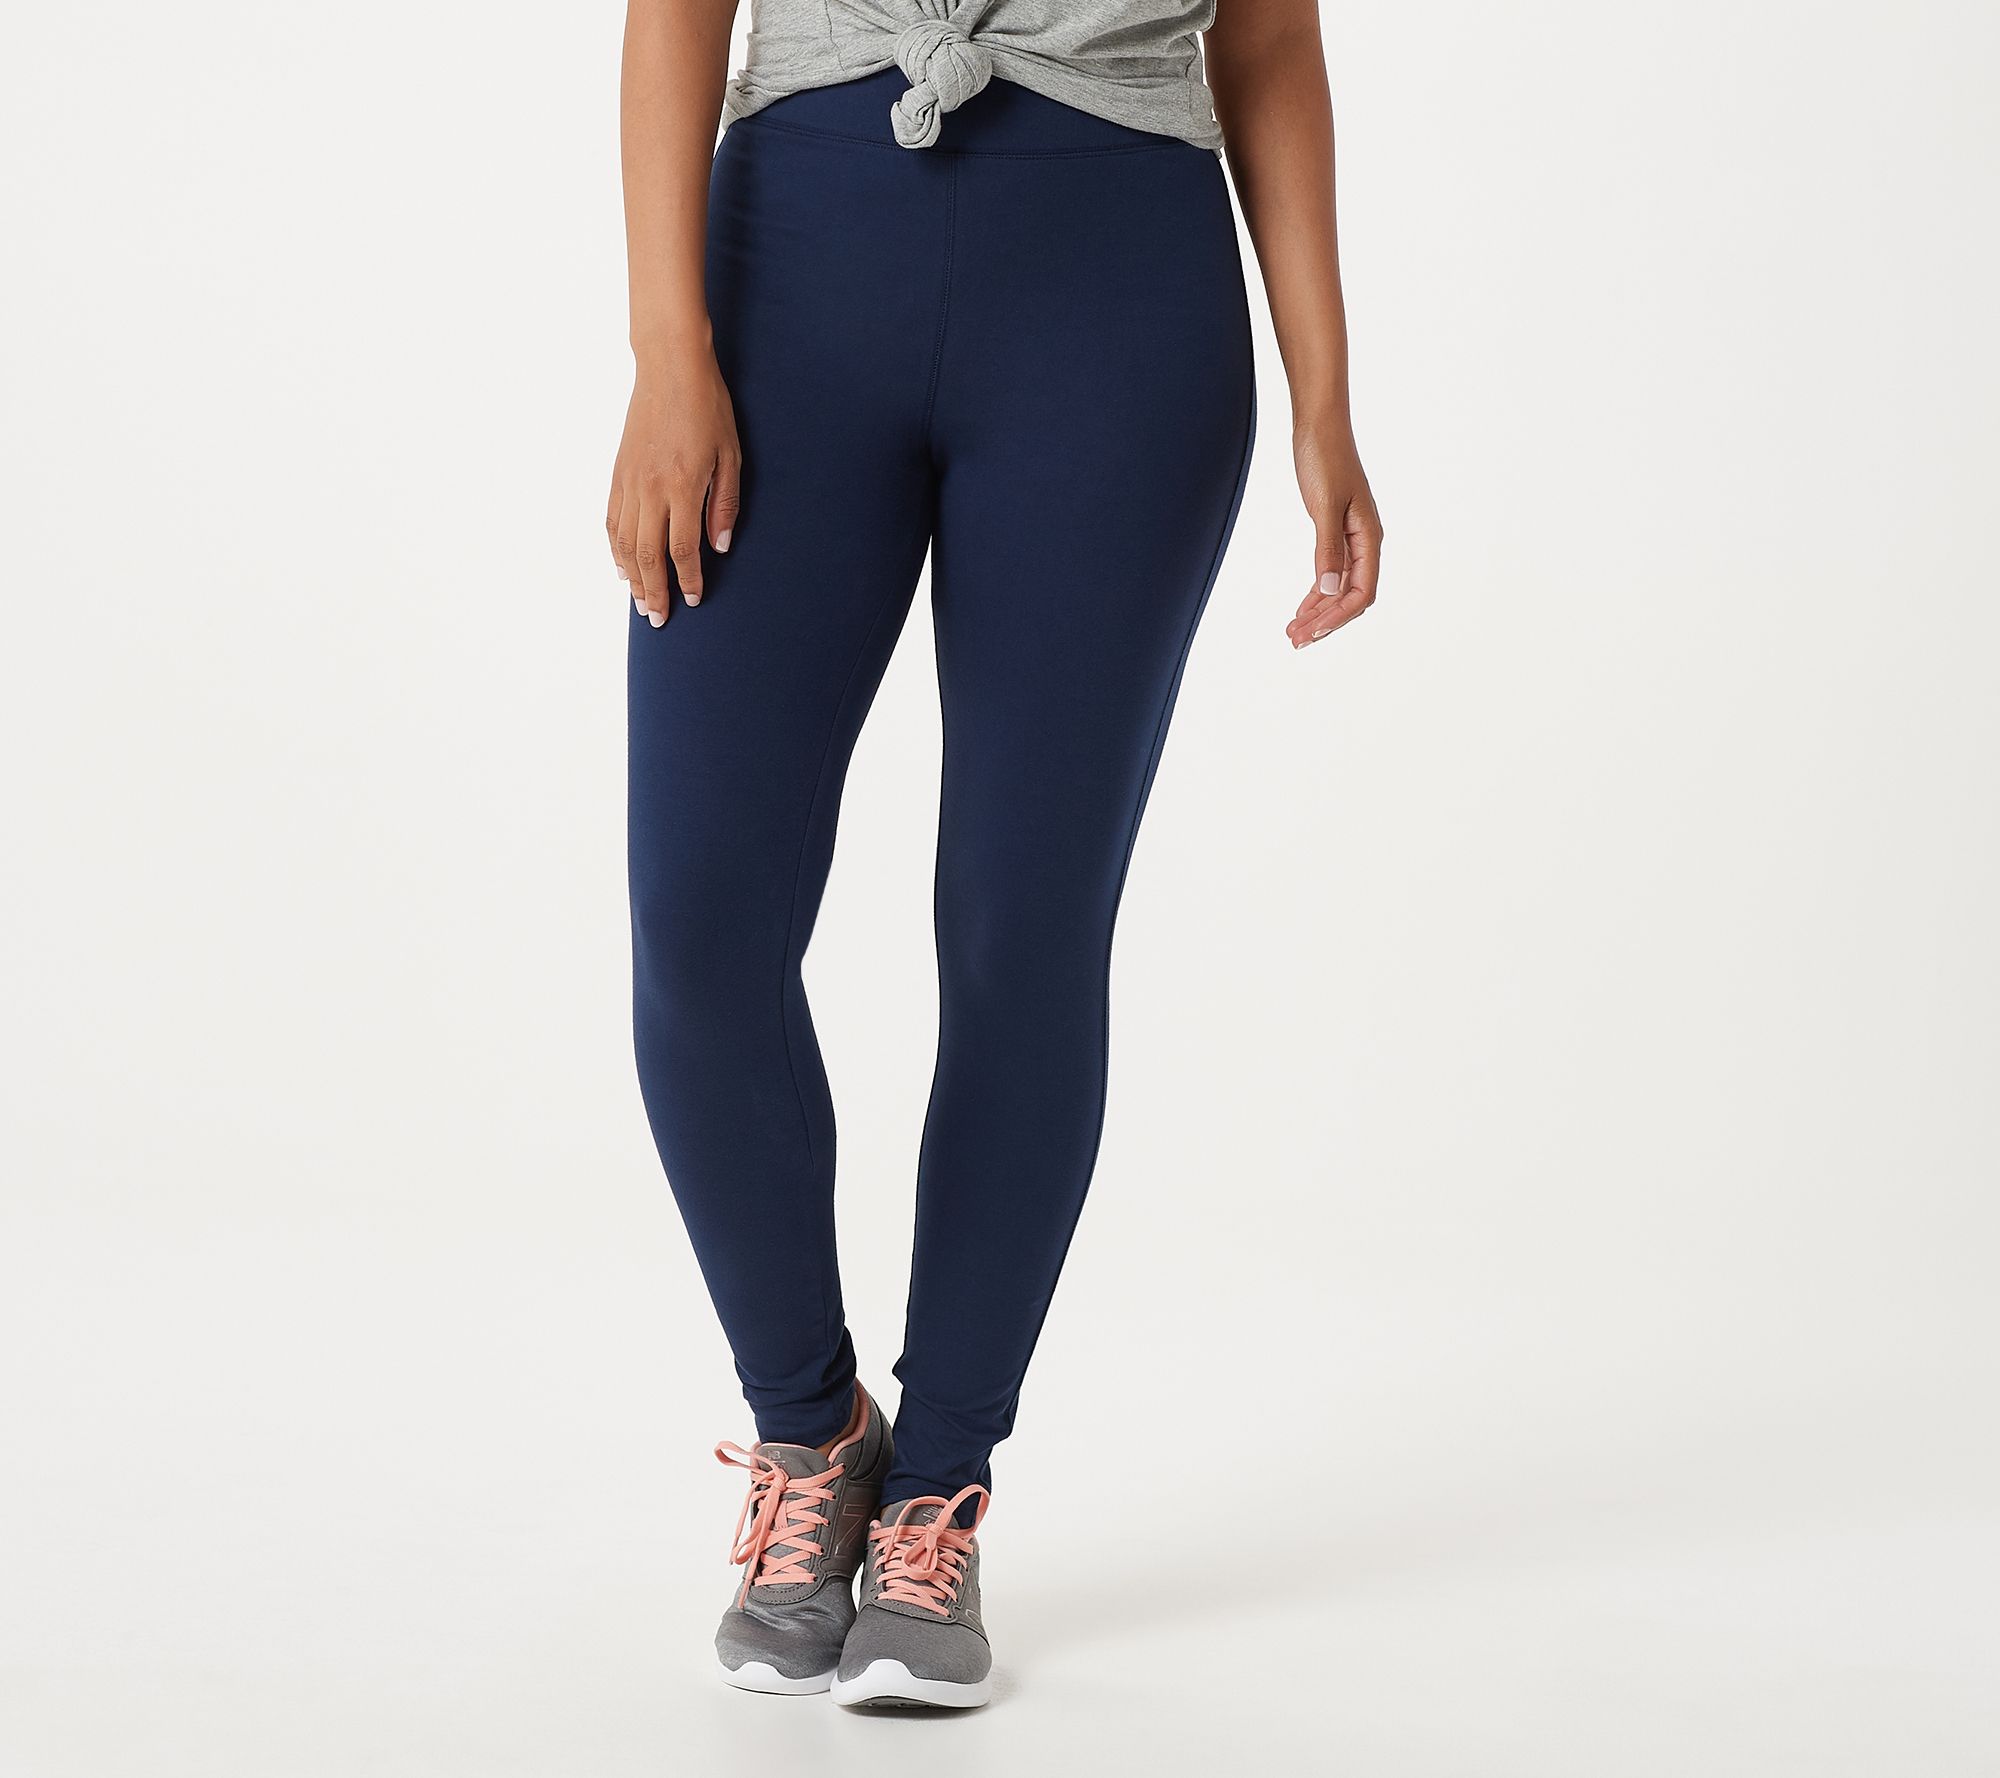 lululemon tights leggings for a petite frame  Workout clothes, Active wear,  Active wear outfits